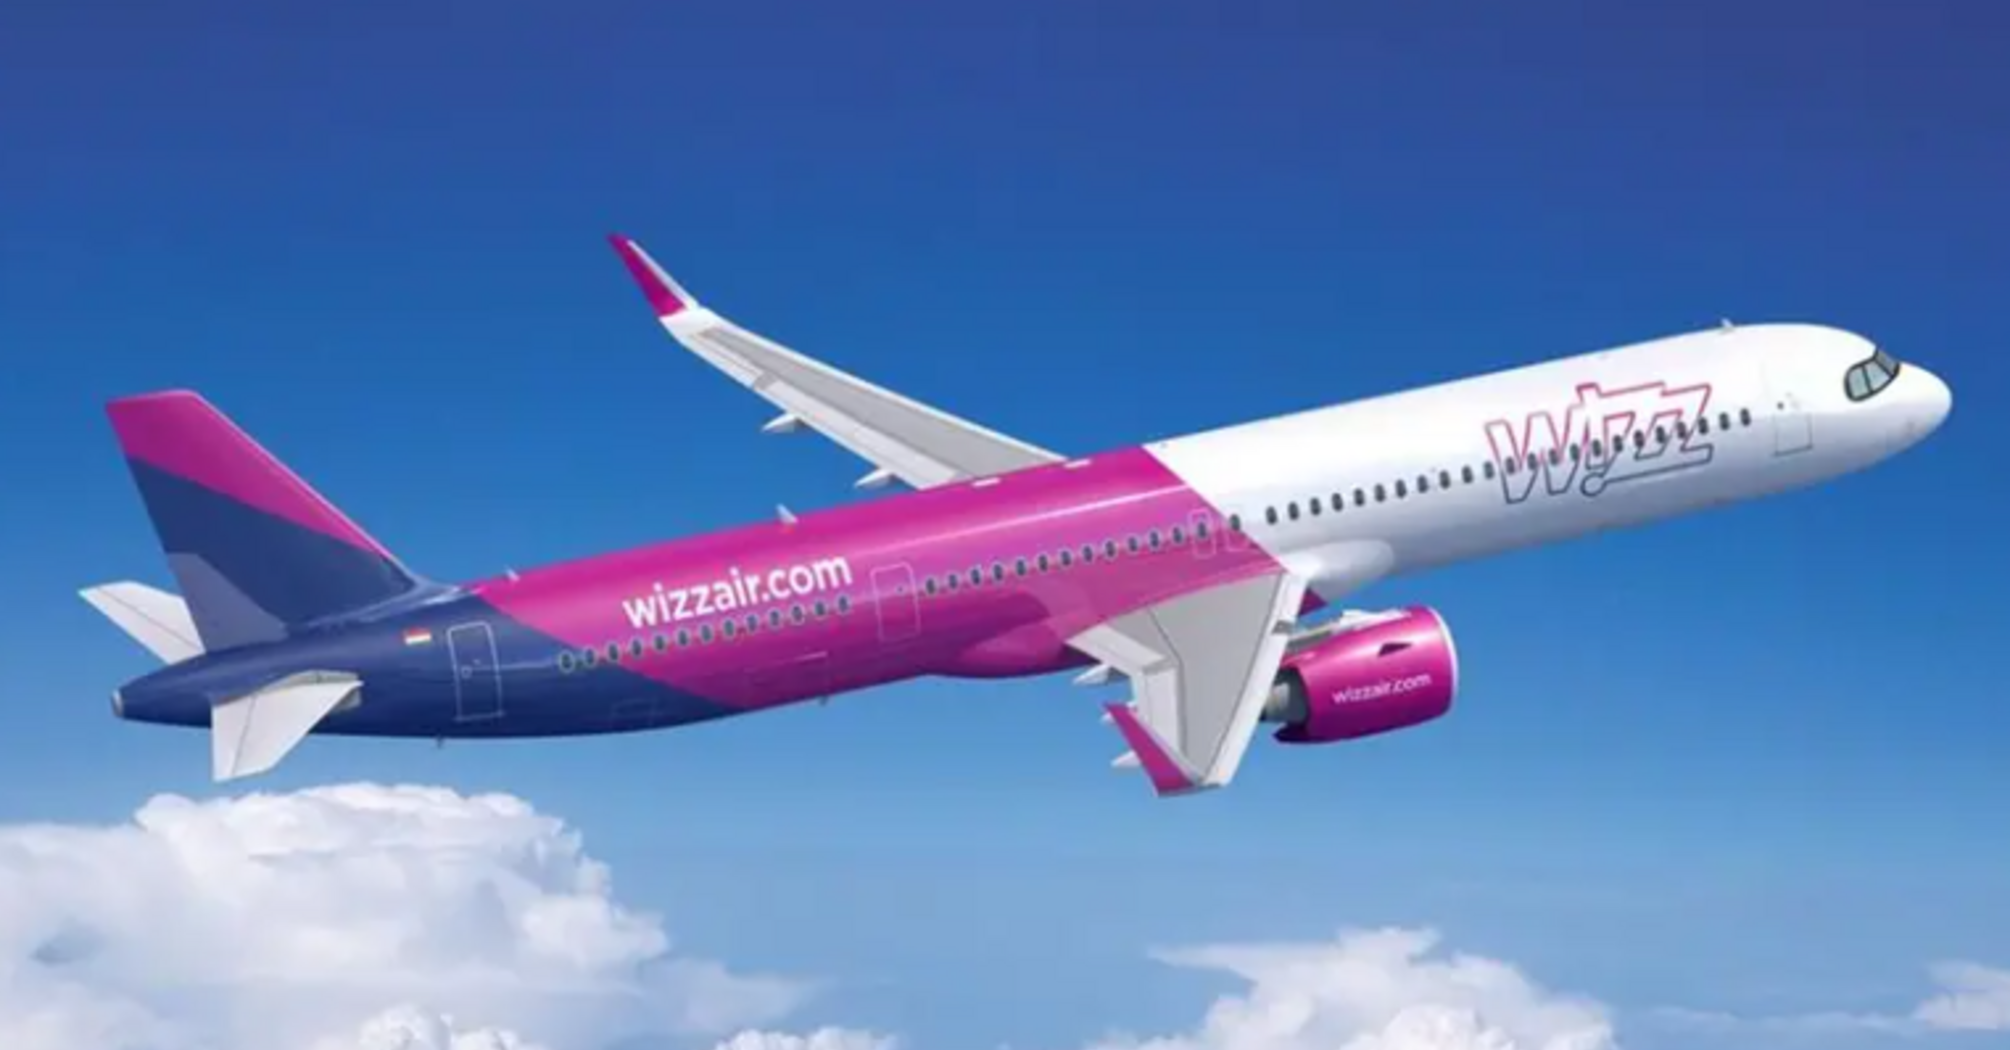 Wizz Air Abu Dhabi launches first surprise flight